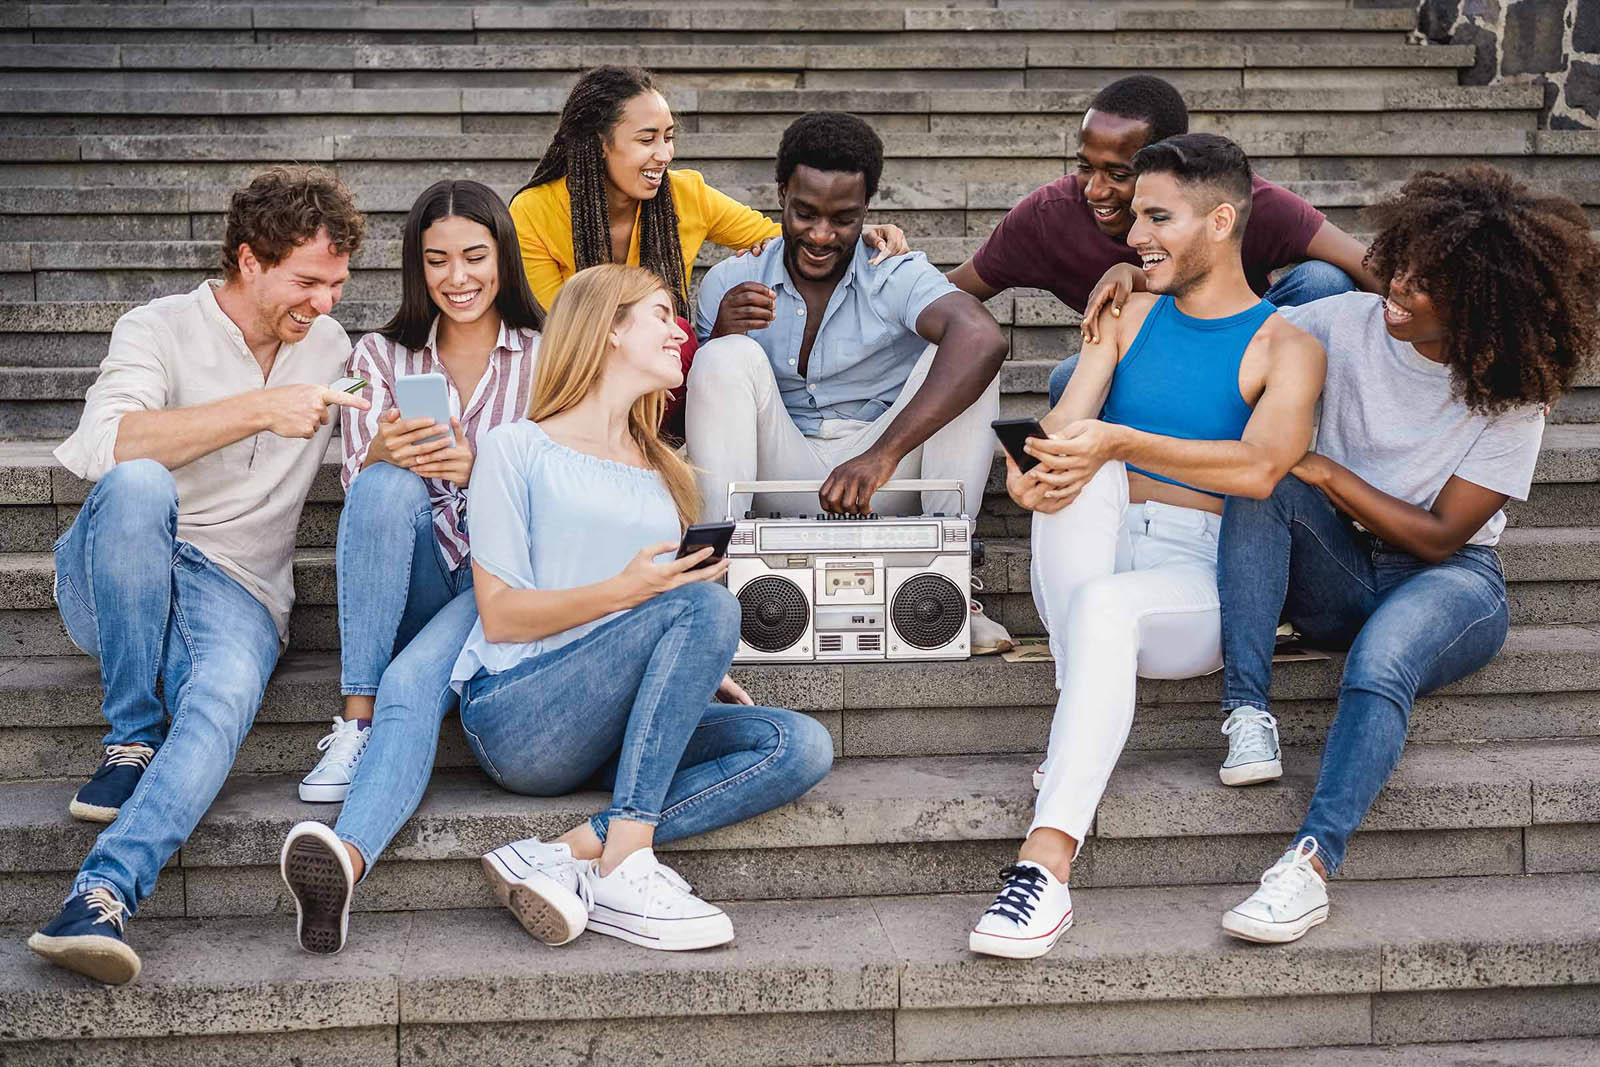 https://www.crresearch.com/wp-content/uploads/2022/08/young_diverse_people_having_fun_listening_music_lgbtq_lowres.jpg